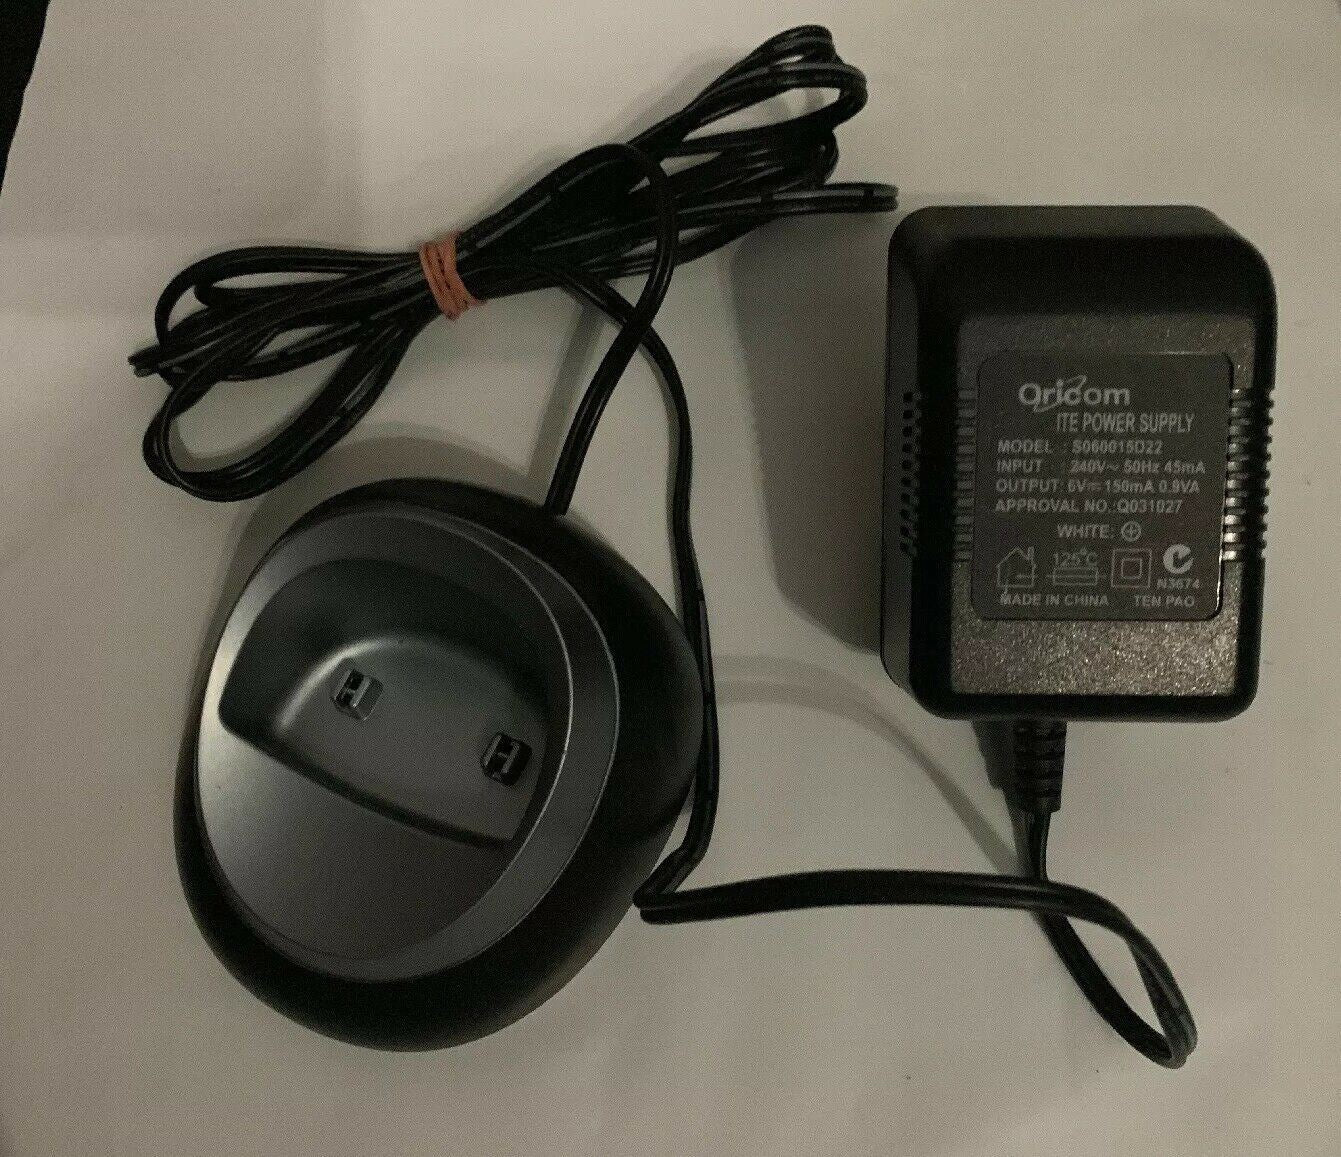 Oricom P80+1BK Base Charger Cordless Phone Charger & S060015D22 AC Adapter